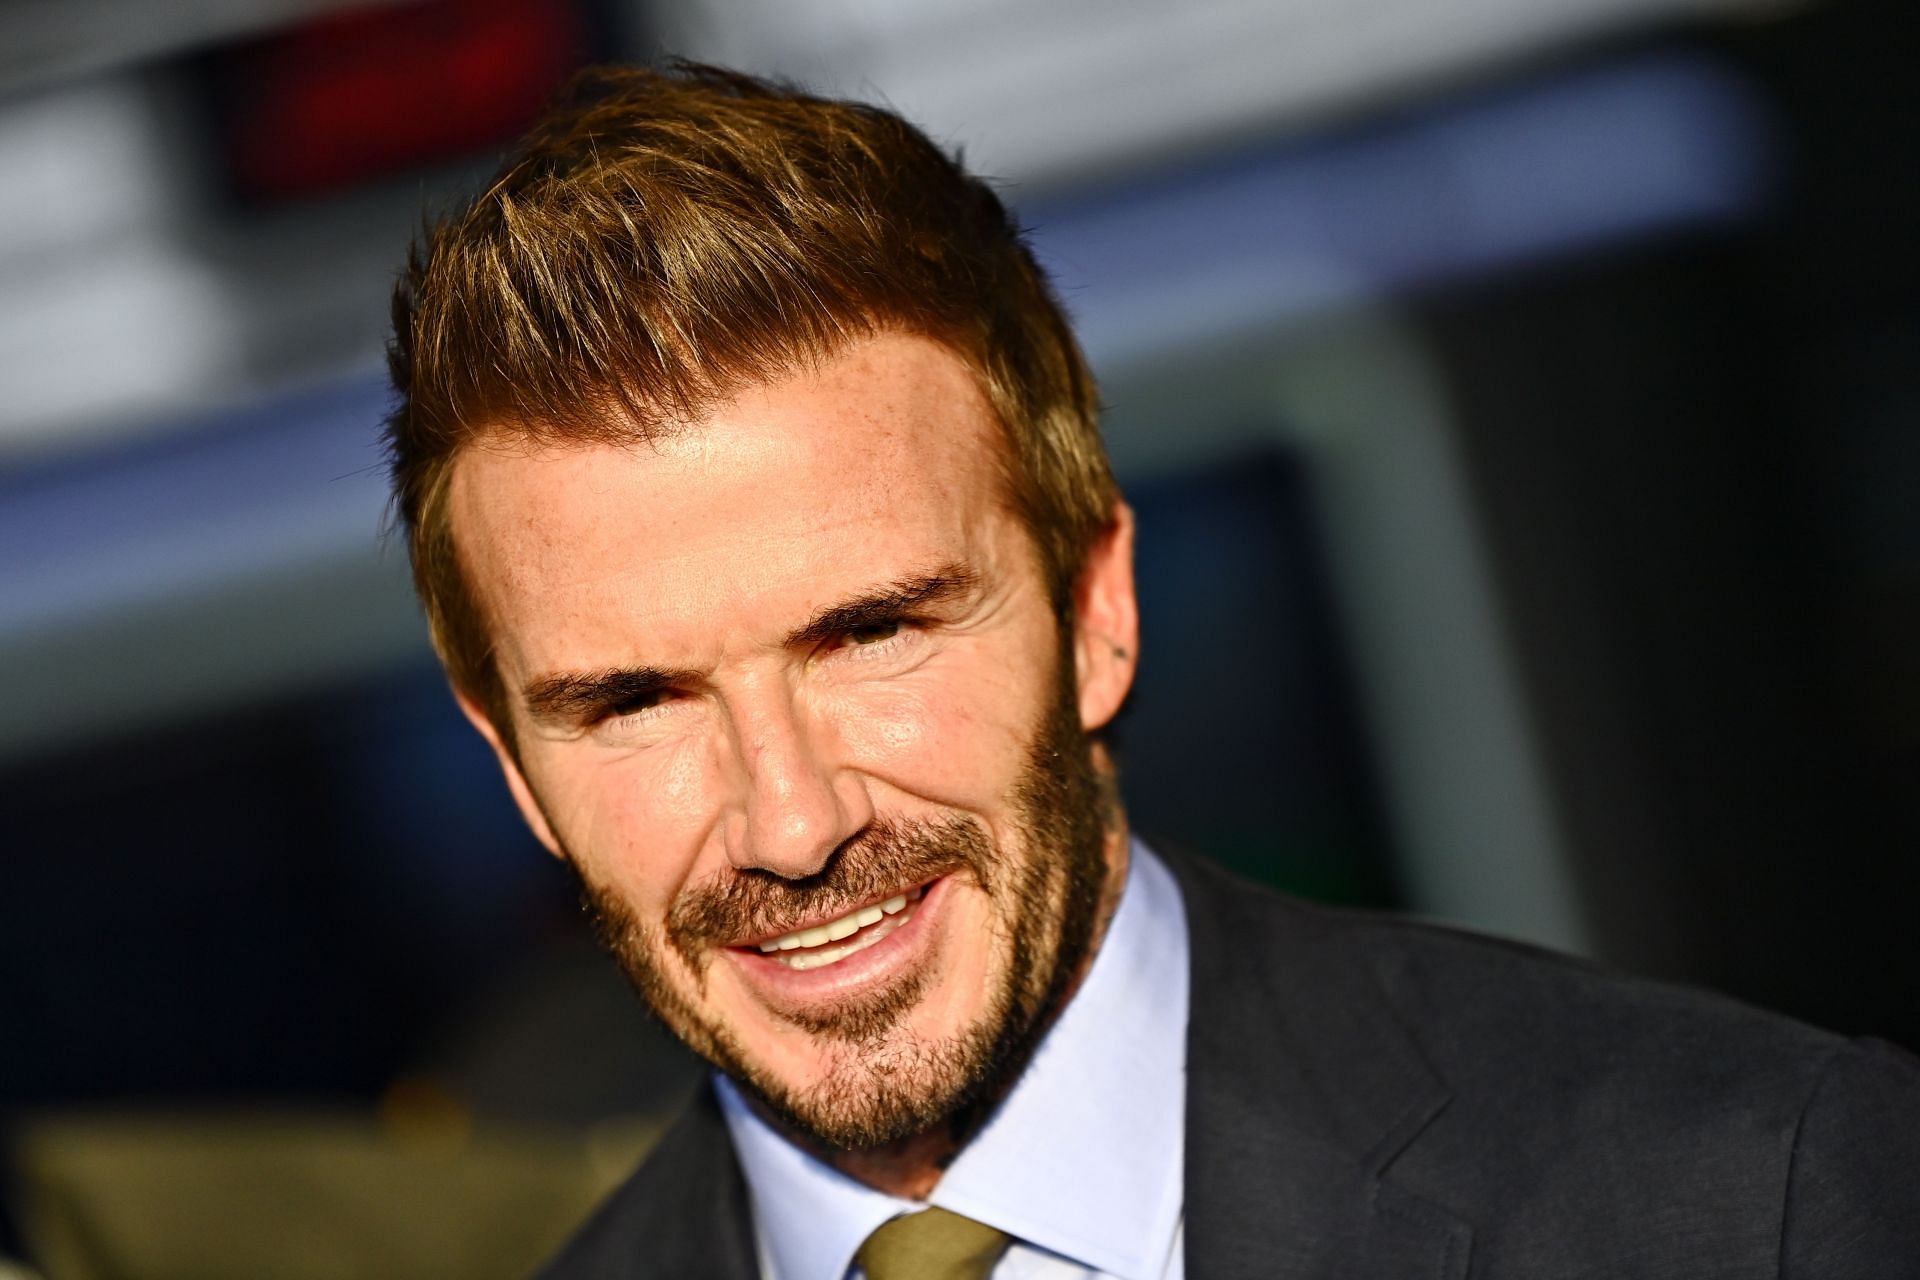 David Beckham could persuade star names to join the MLS franchise.